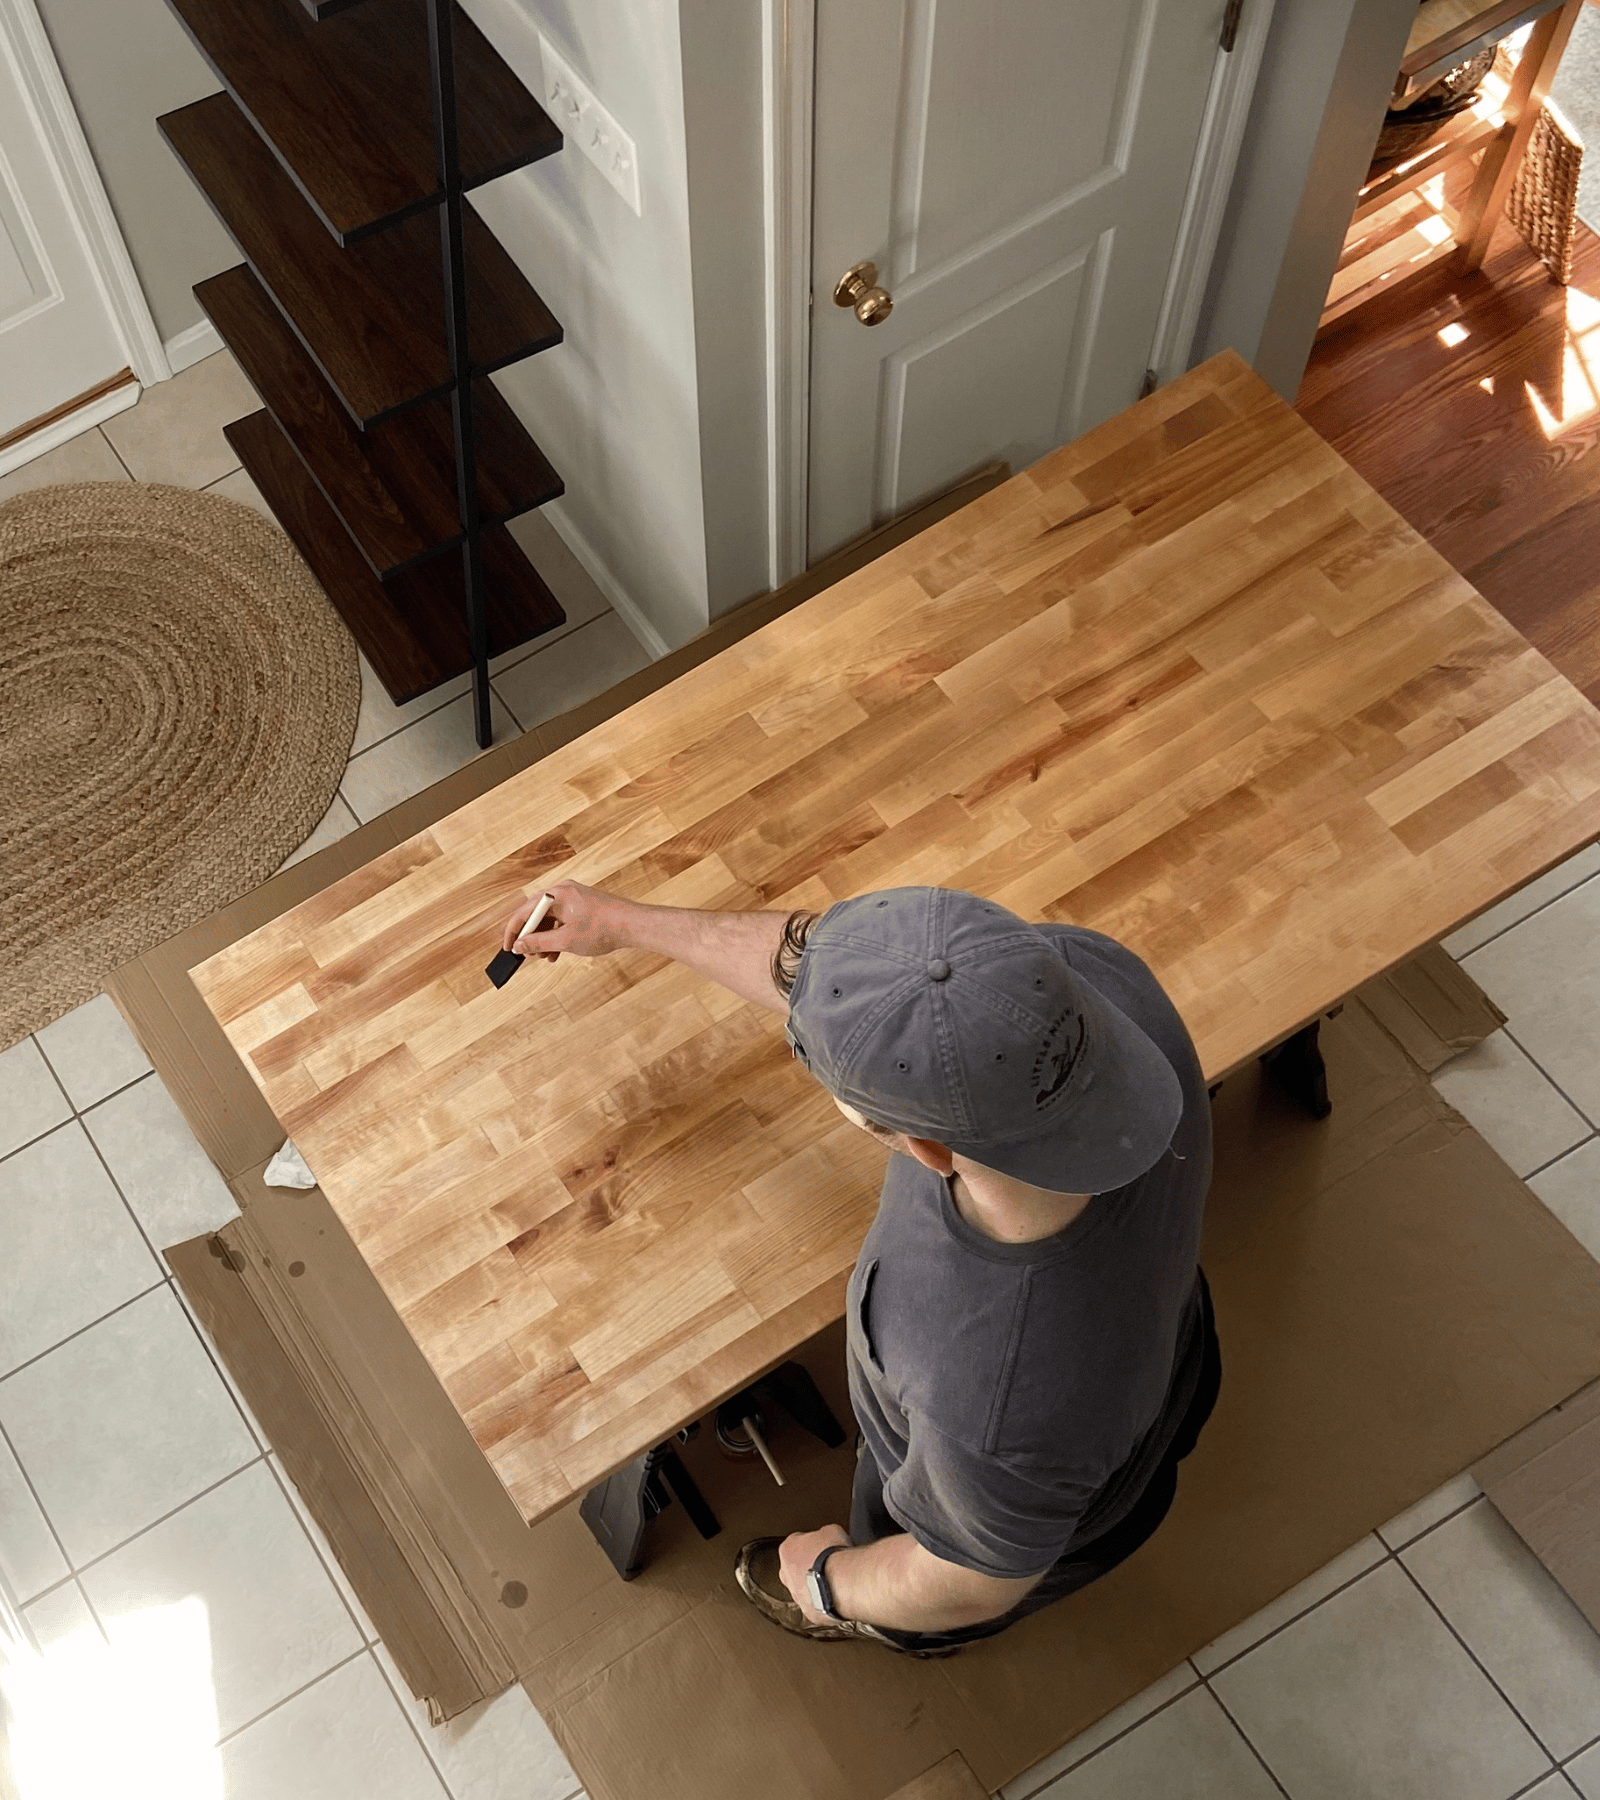 https://homebyalley.com/wp-content/uploads/2022/11/How-to-Seal-Butcher-Block-Featured-Image.png